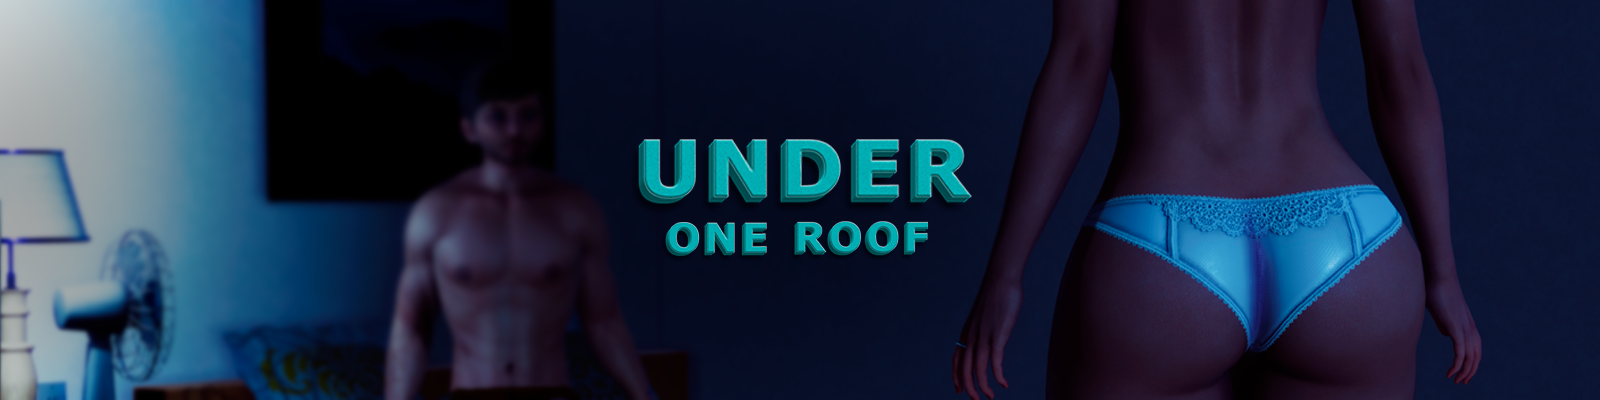 Under One Roof1.png